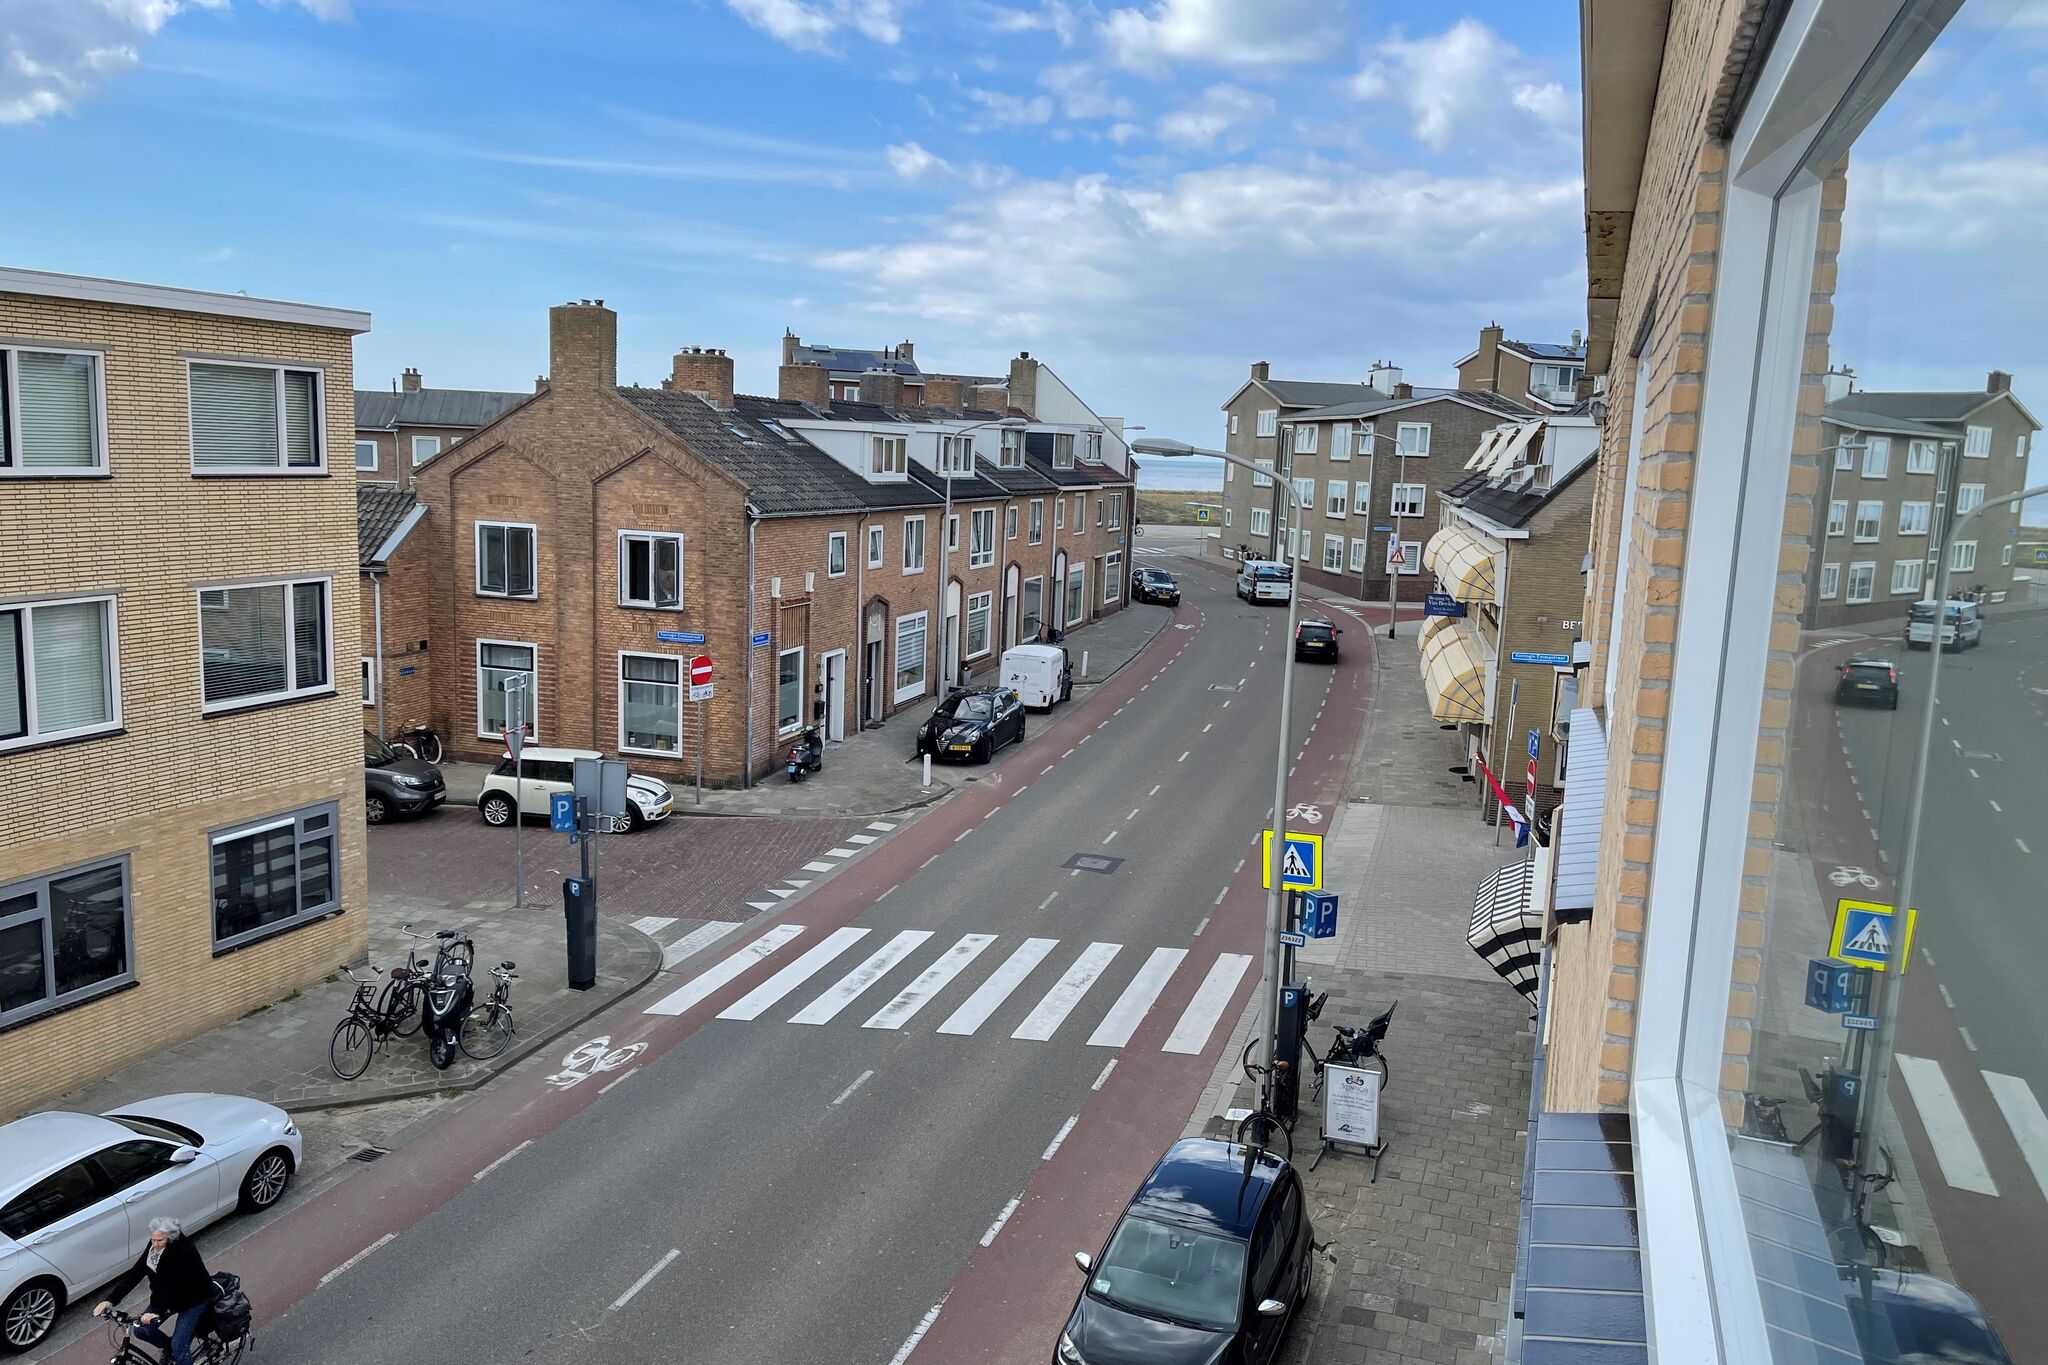 Apartment with sea view and parking in Katwijk aan Zee